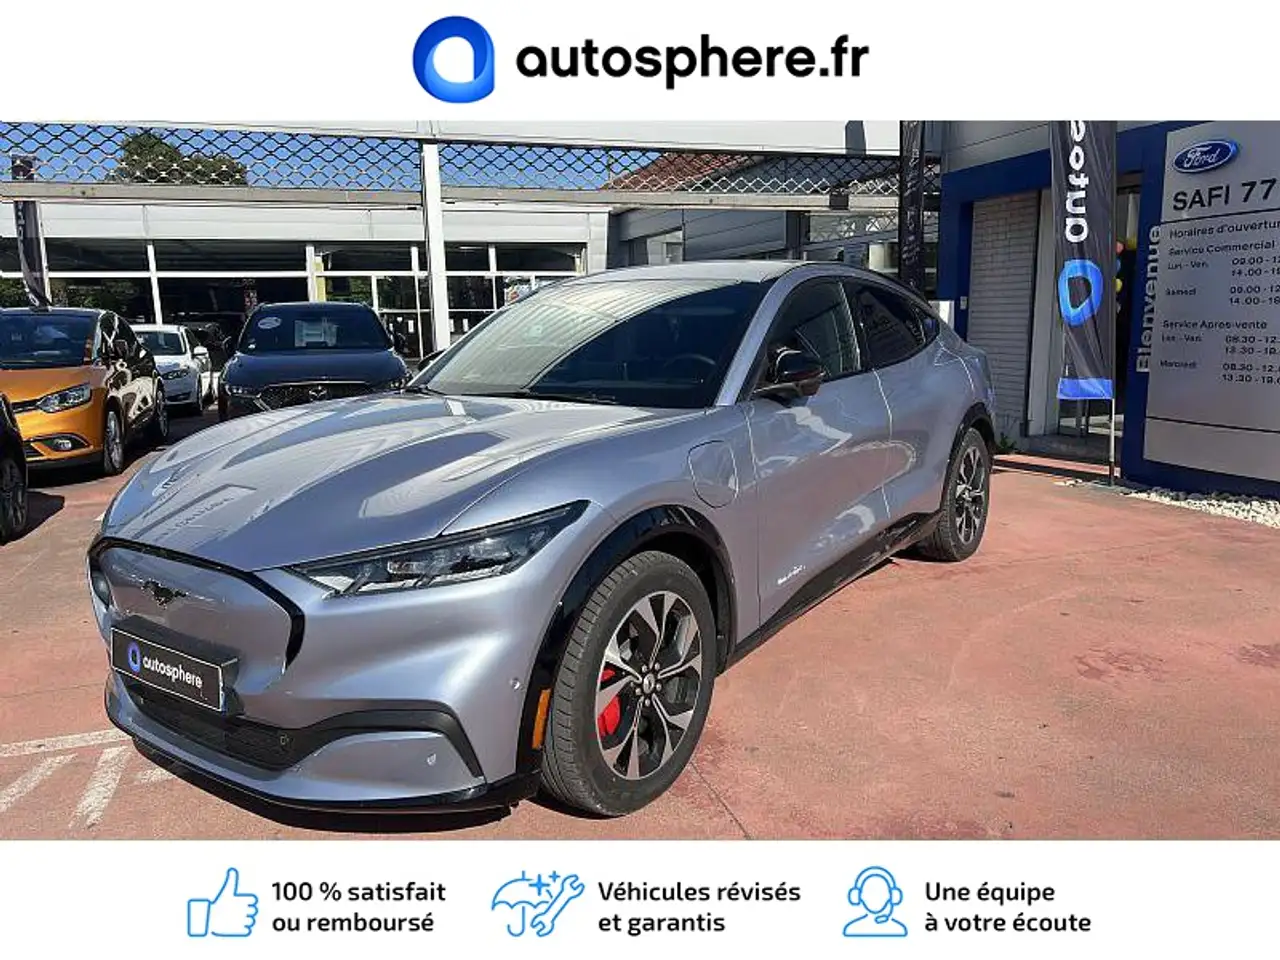 2022 - Ford Mustang Mustang Boîte automatique SUV/4x4/Pick-Up